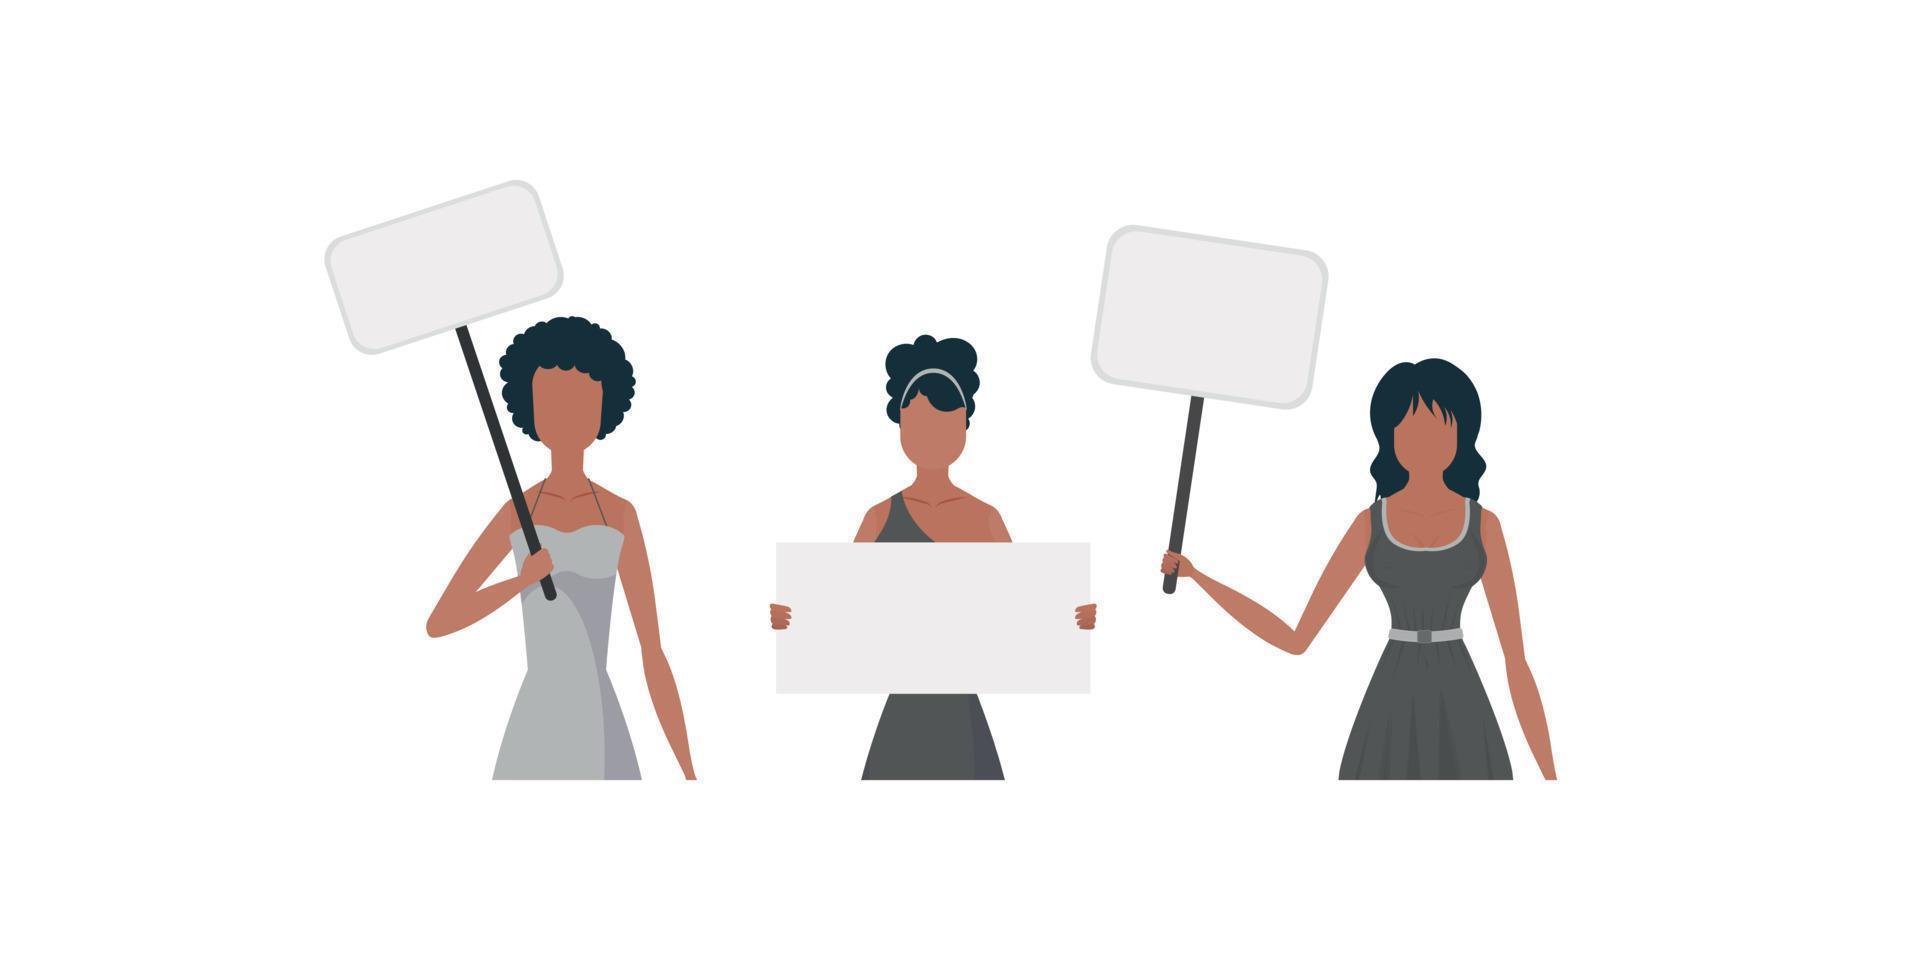 A set of girls who are protesting. Empty transport in the hands. Cartoon style. Vector illustration.